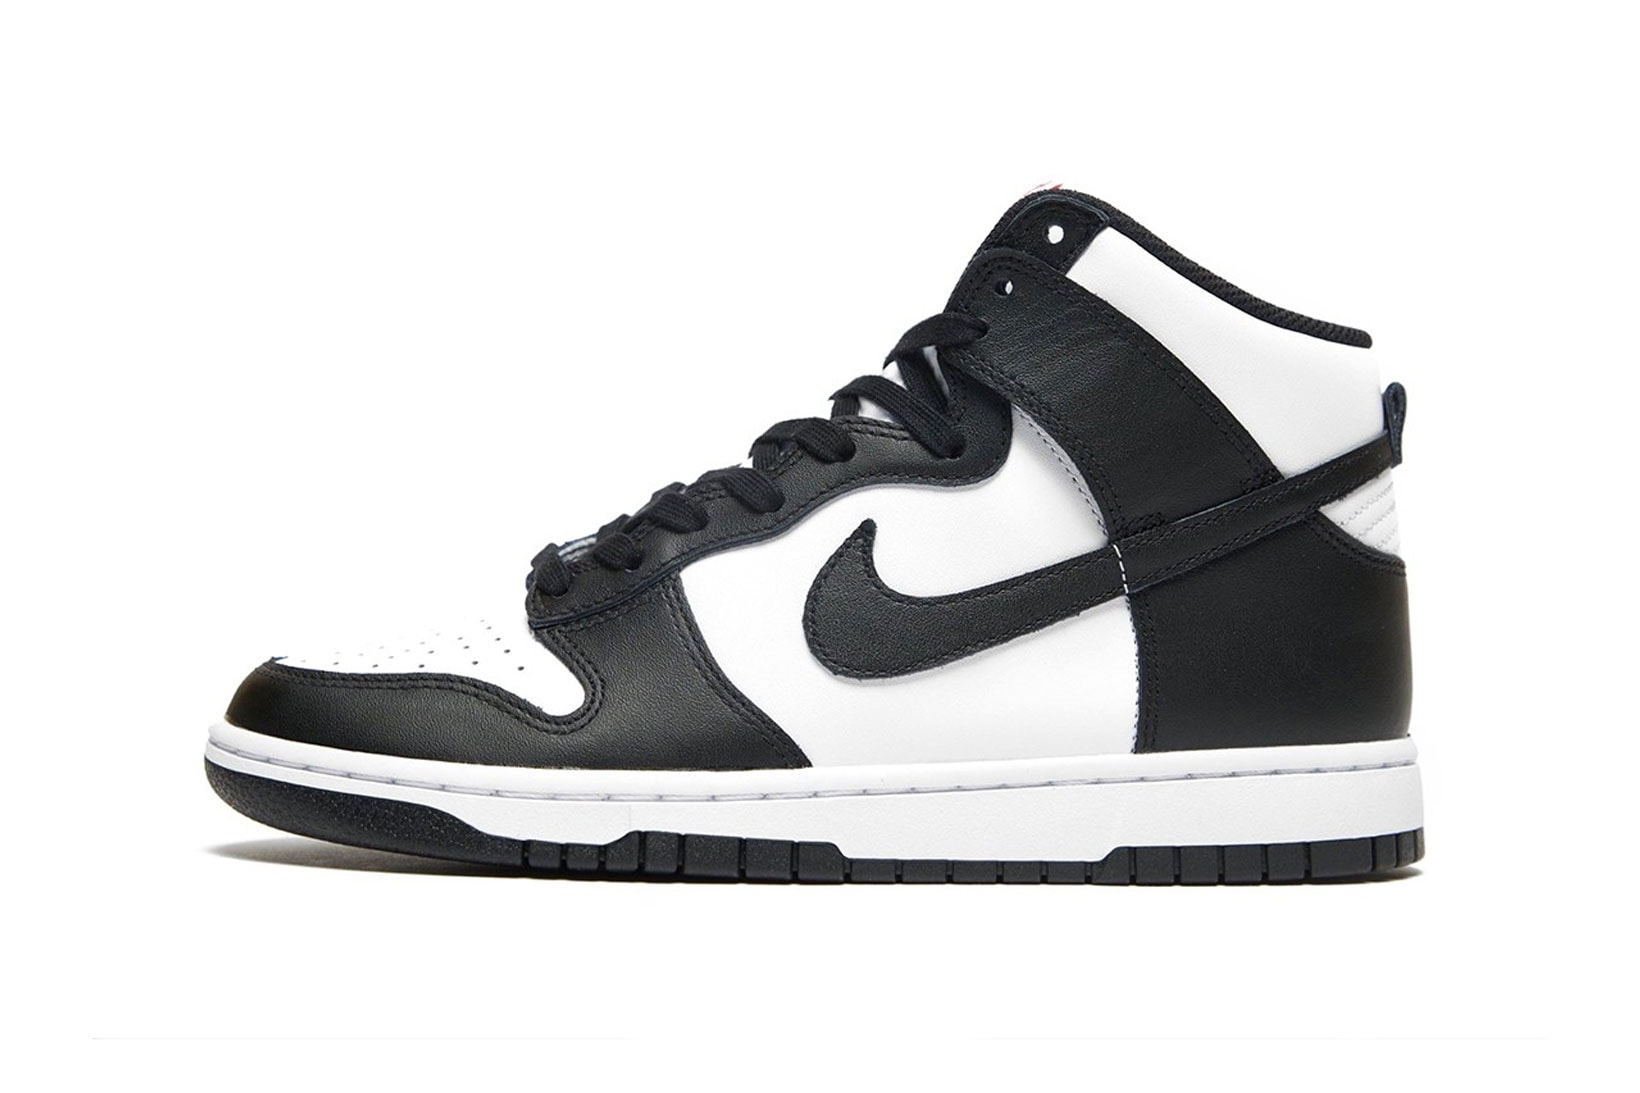 nike dunk high panda black white sneakers official look laterals details